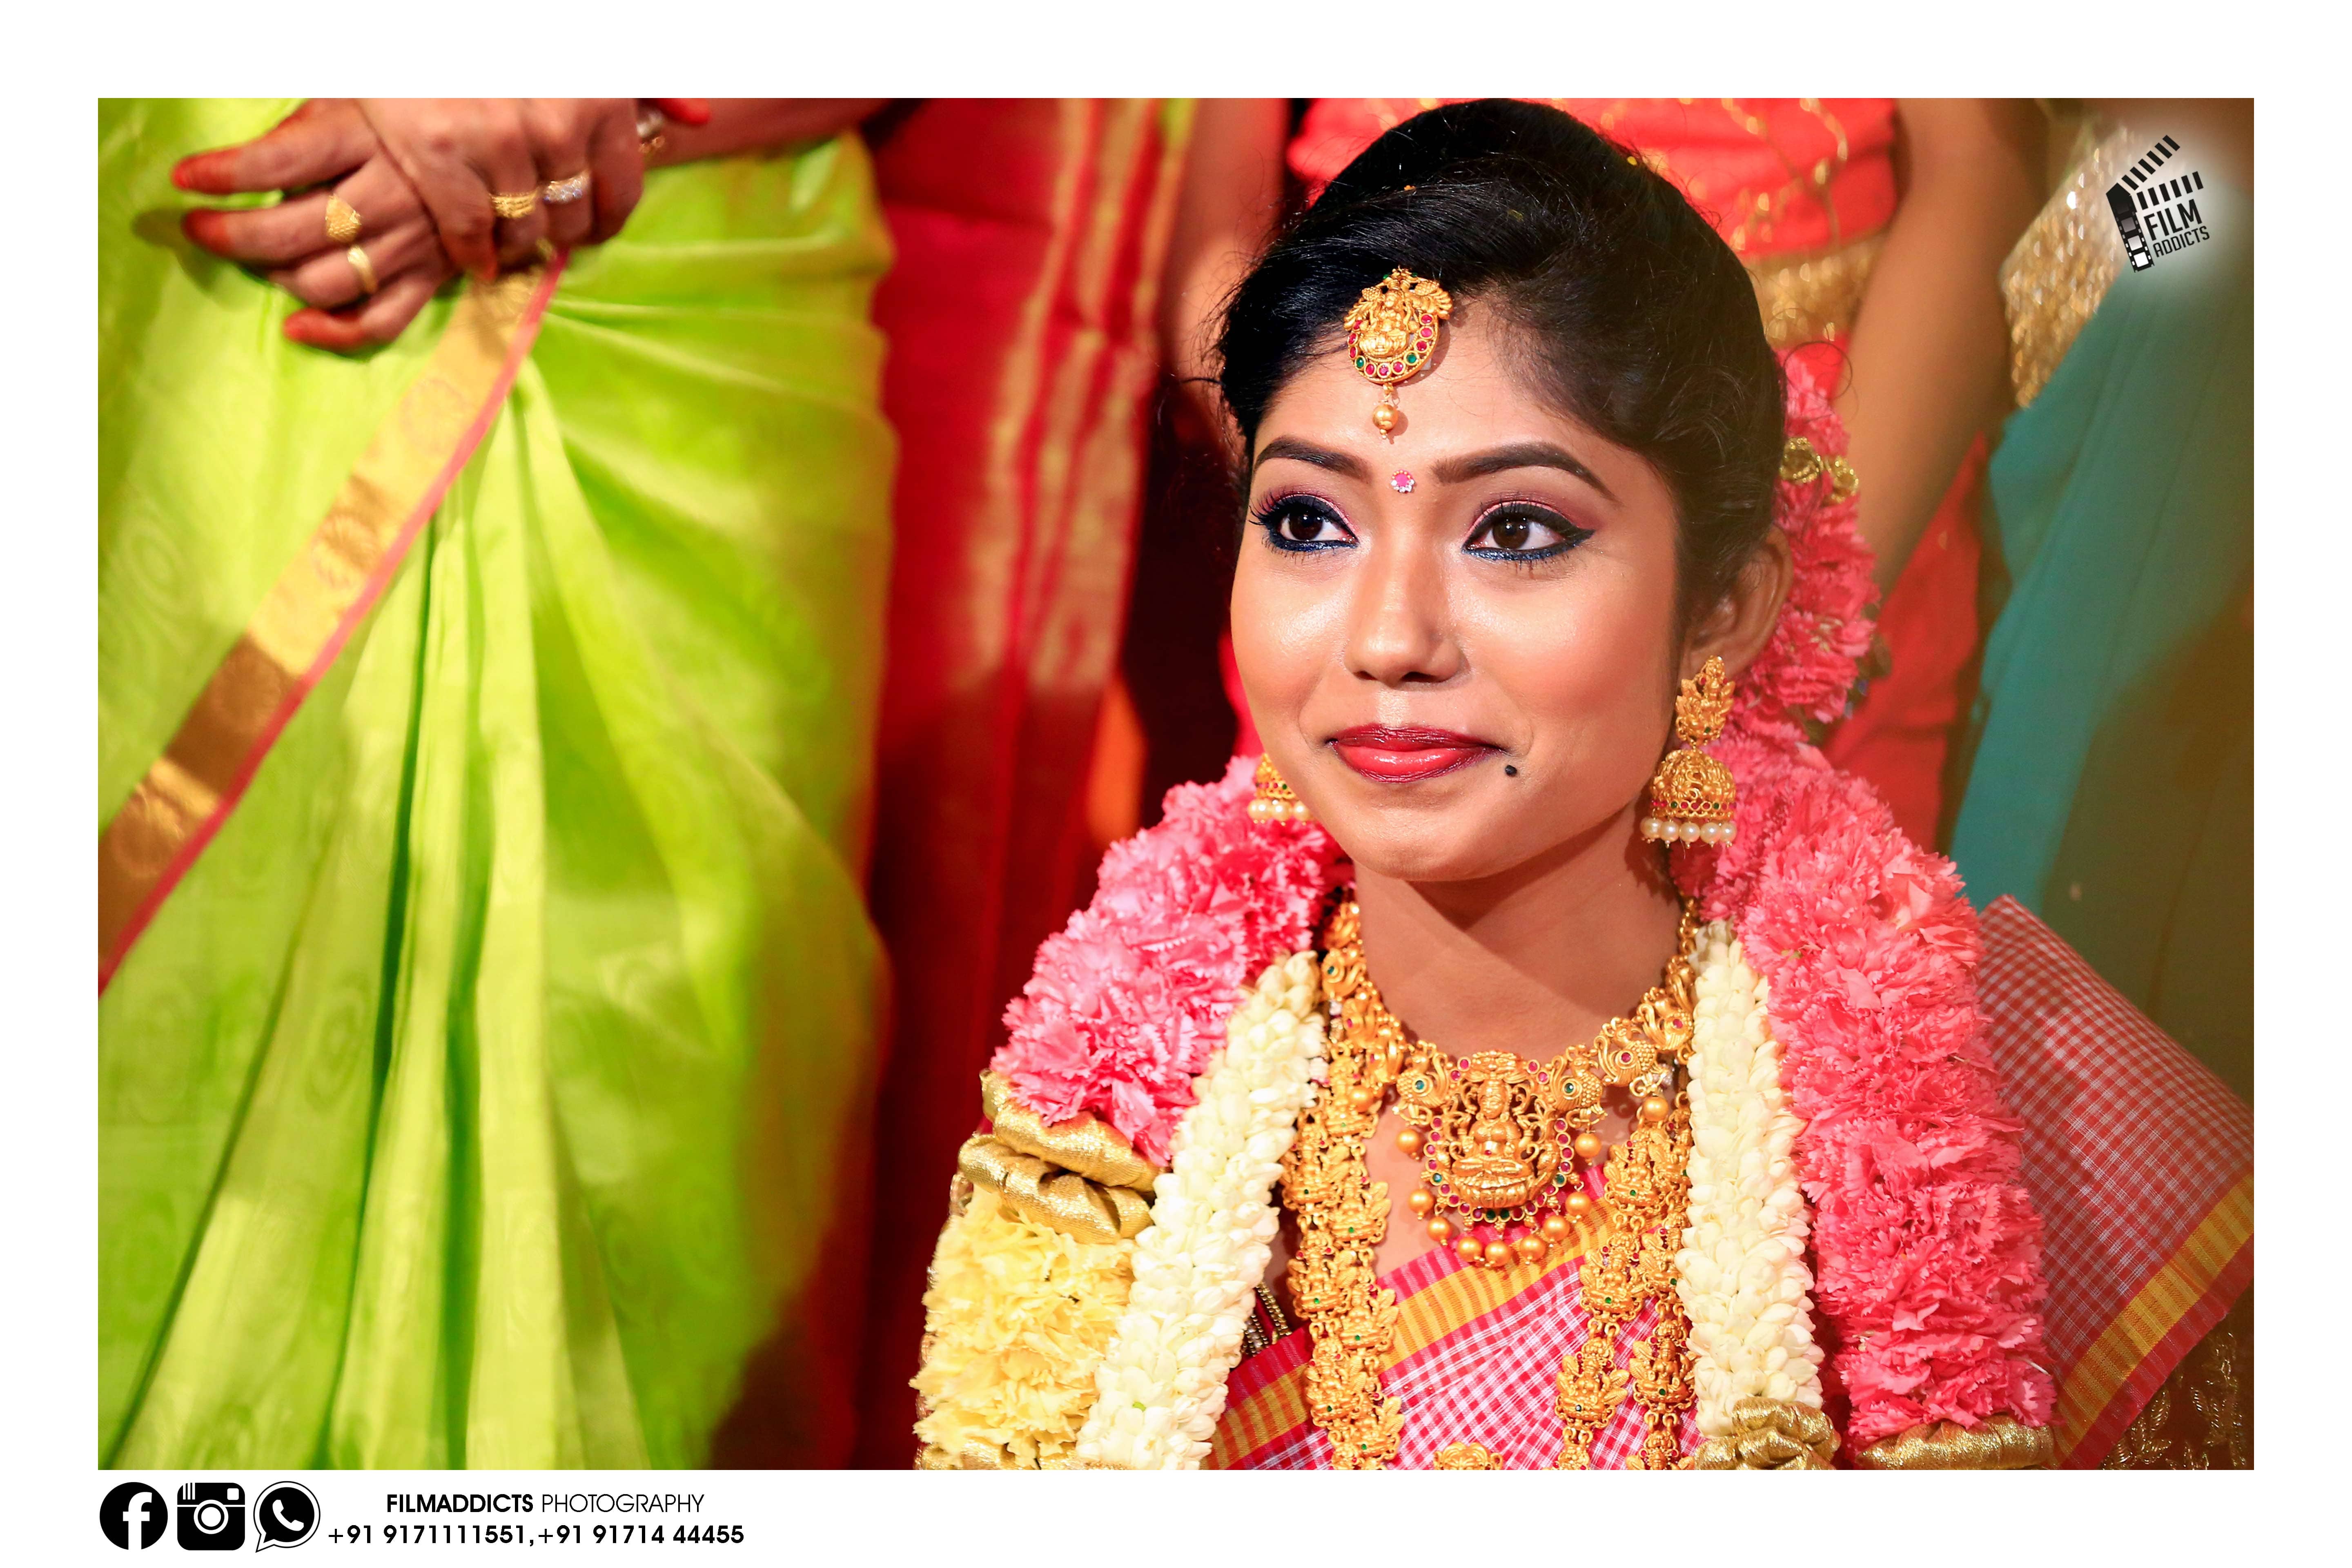 best-candid-photographer candid-photographer-in-periyakulam candid-wedding-photographers-in-periyakulam photographers-in-periyakulam best-christian-candid-photographer christian-candid-photographer-in-periyakulam christian-professional-wedding-photographers-in-periyakulam christian-professional-wedding-photographers-in-thenicatageroy-professional-wedding-photographers-in-periyakulam-11 best-photographers-in-theni top-wedding-filmmakers-in-periyakulam wedding-photographers-in-periyakulamtop-wedding-filmmakers-in-periyakulam wedding-photographers-in-theni catageroy-professional-wedding-photographers-in-periyakulamchristian-candid-photographer-in-theni christian-professional-wedding-photographers-in-theniasian-wedding-photography-in-theni best-christian candid-photographers-in-periyakulam asian-wedding-photography-in-periyakulam best-candid-photographers-in-periyakulam best-photographers-in-periyakulam best-wedding-photographers-in-periyakulam bharamin-wedding-photographers-in-periyakulam candid-photographers-in-periyakulam-2 candid-wedding-photographers-in-periyakulam christian-wedding-photography-periyakulam marriage-decorators-in-periyakulam-wedding-cards-in-periyakulam